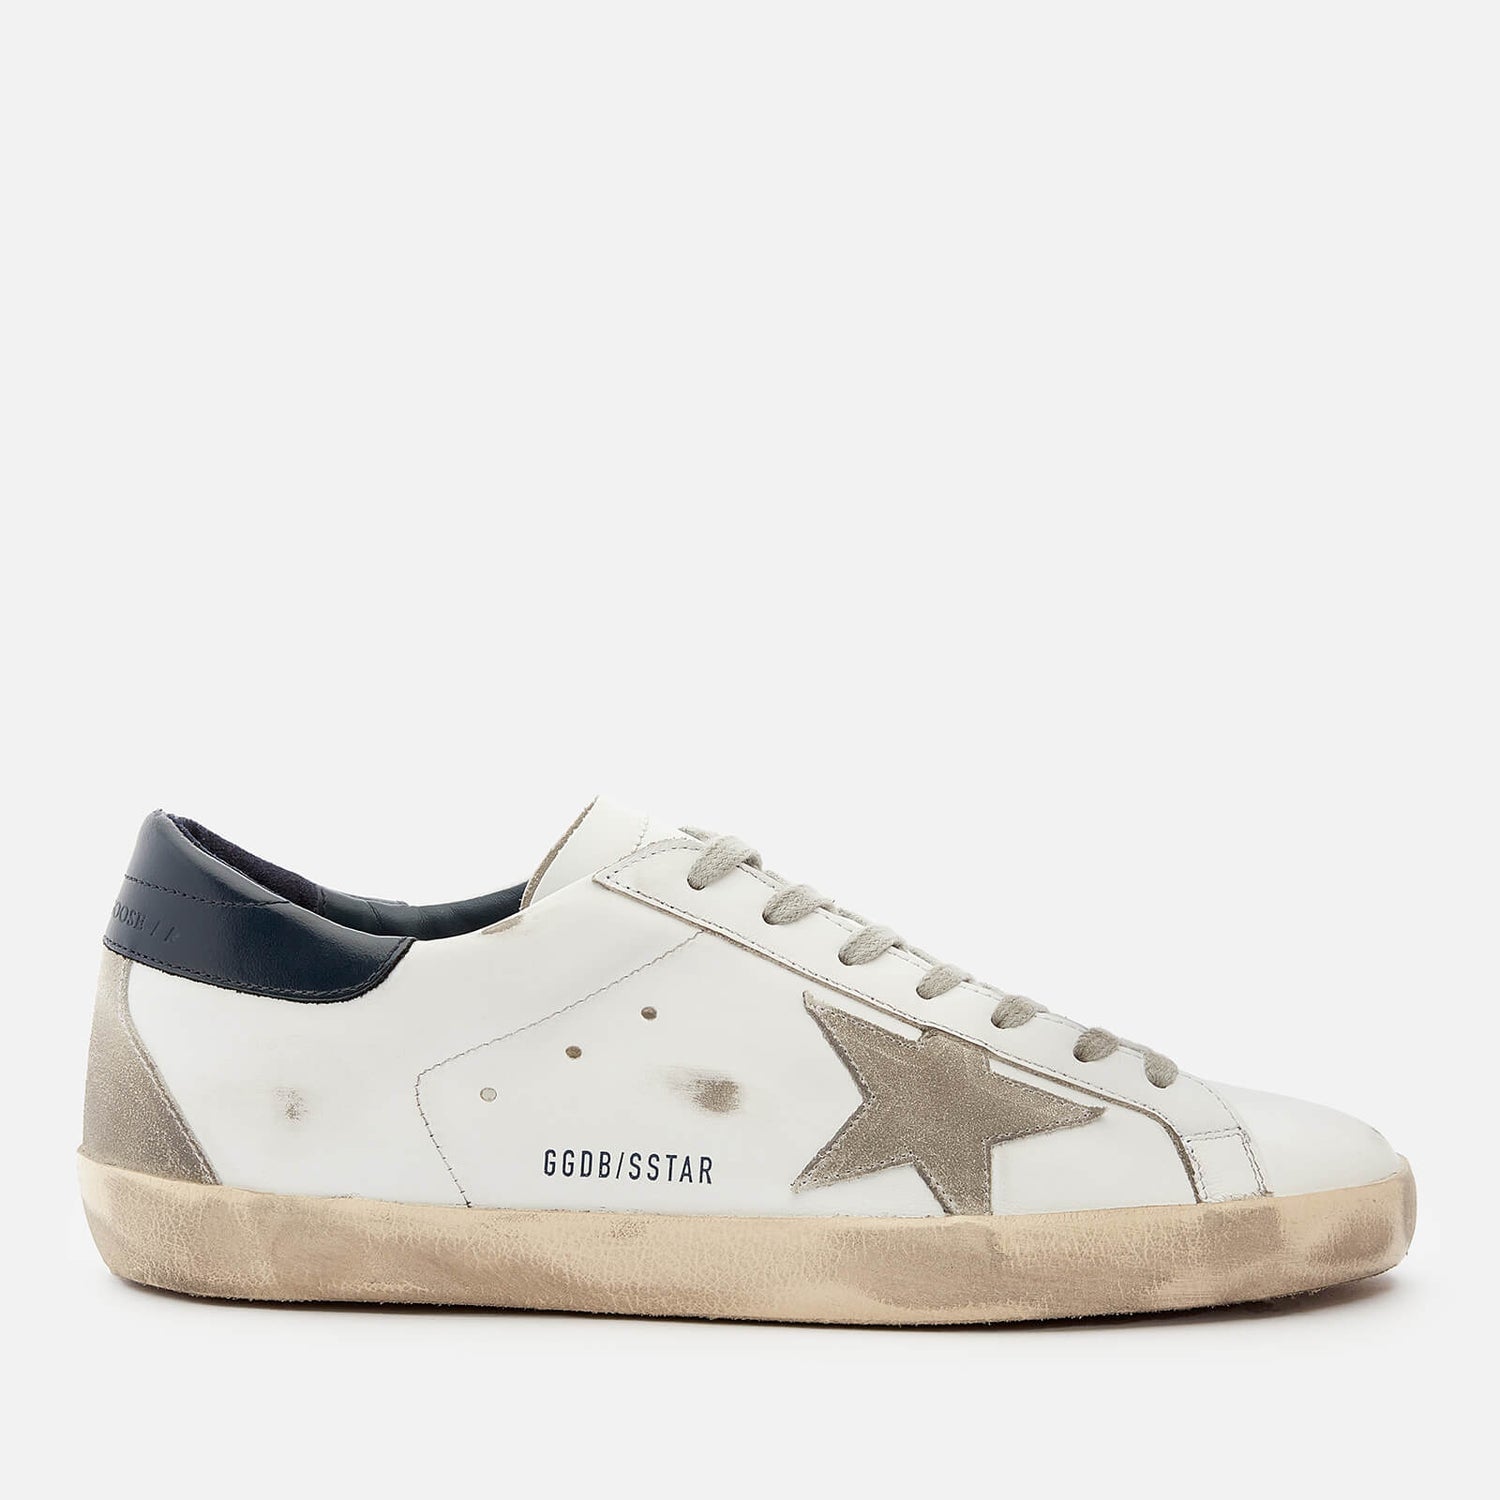 Golden Goose Deluxe Brand Men's Superstar Leather Trainers - White/Ice ...